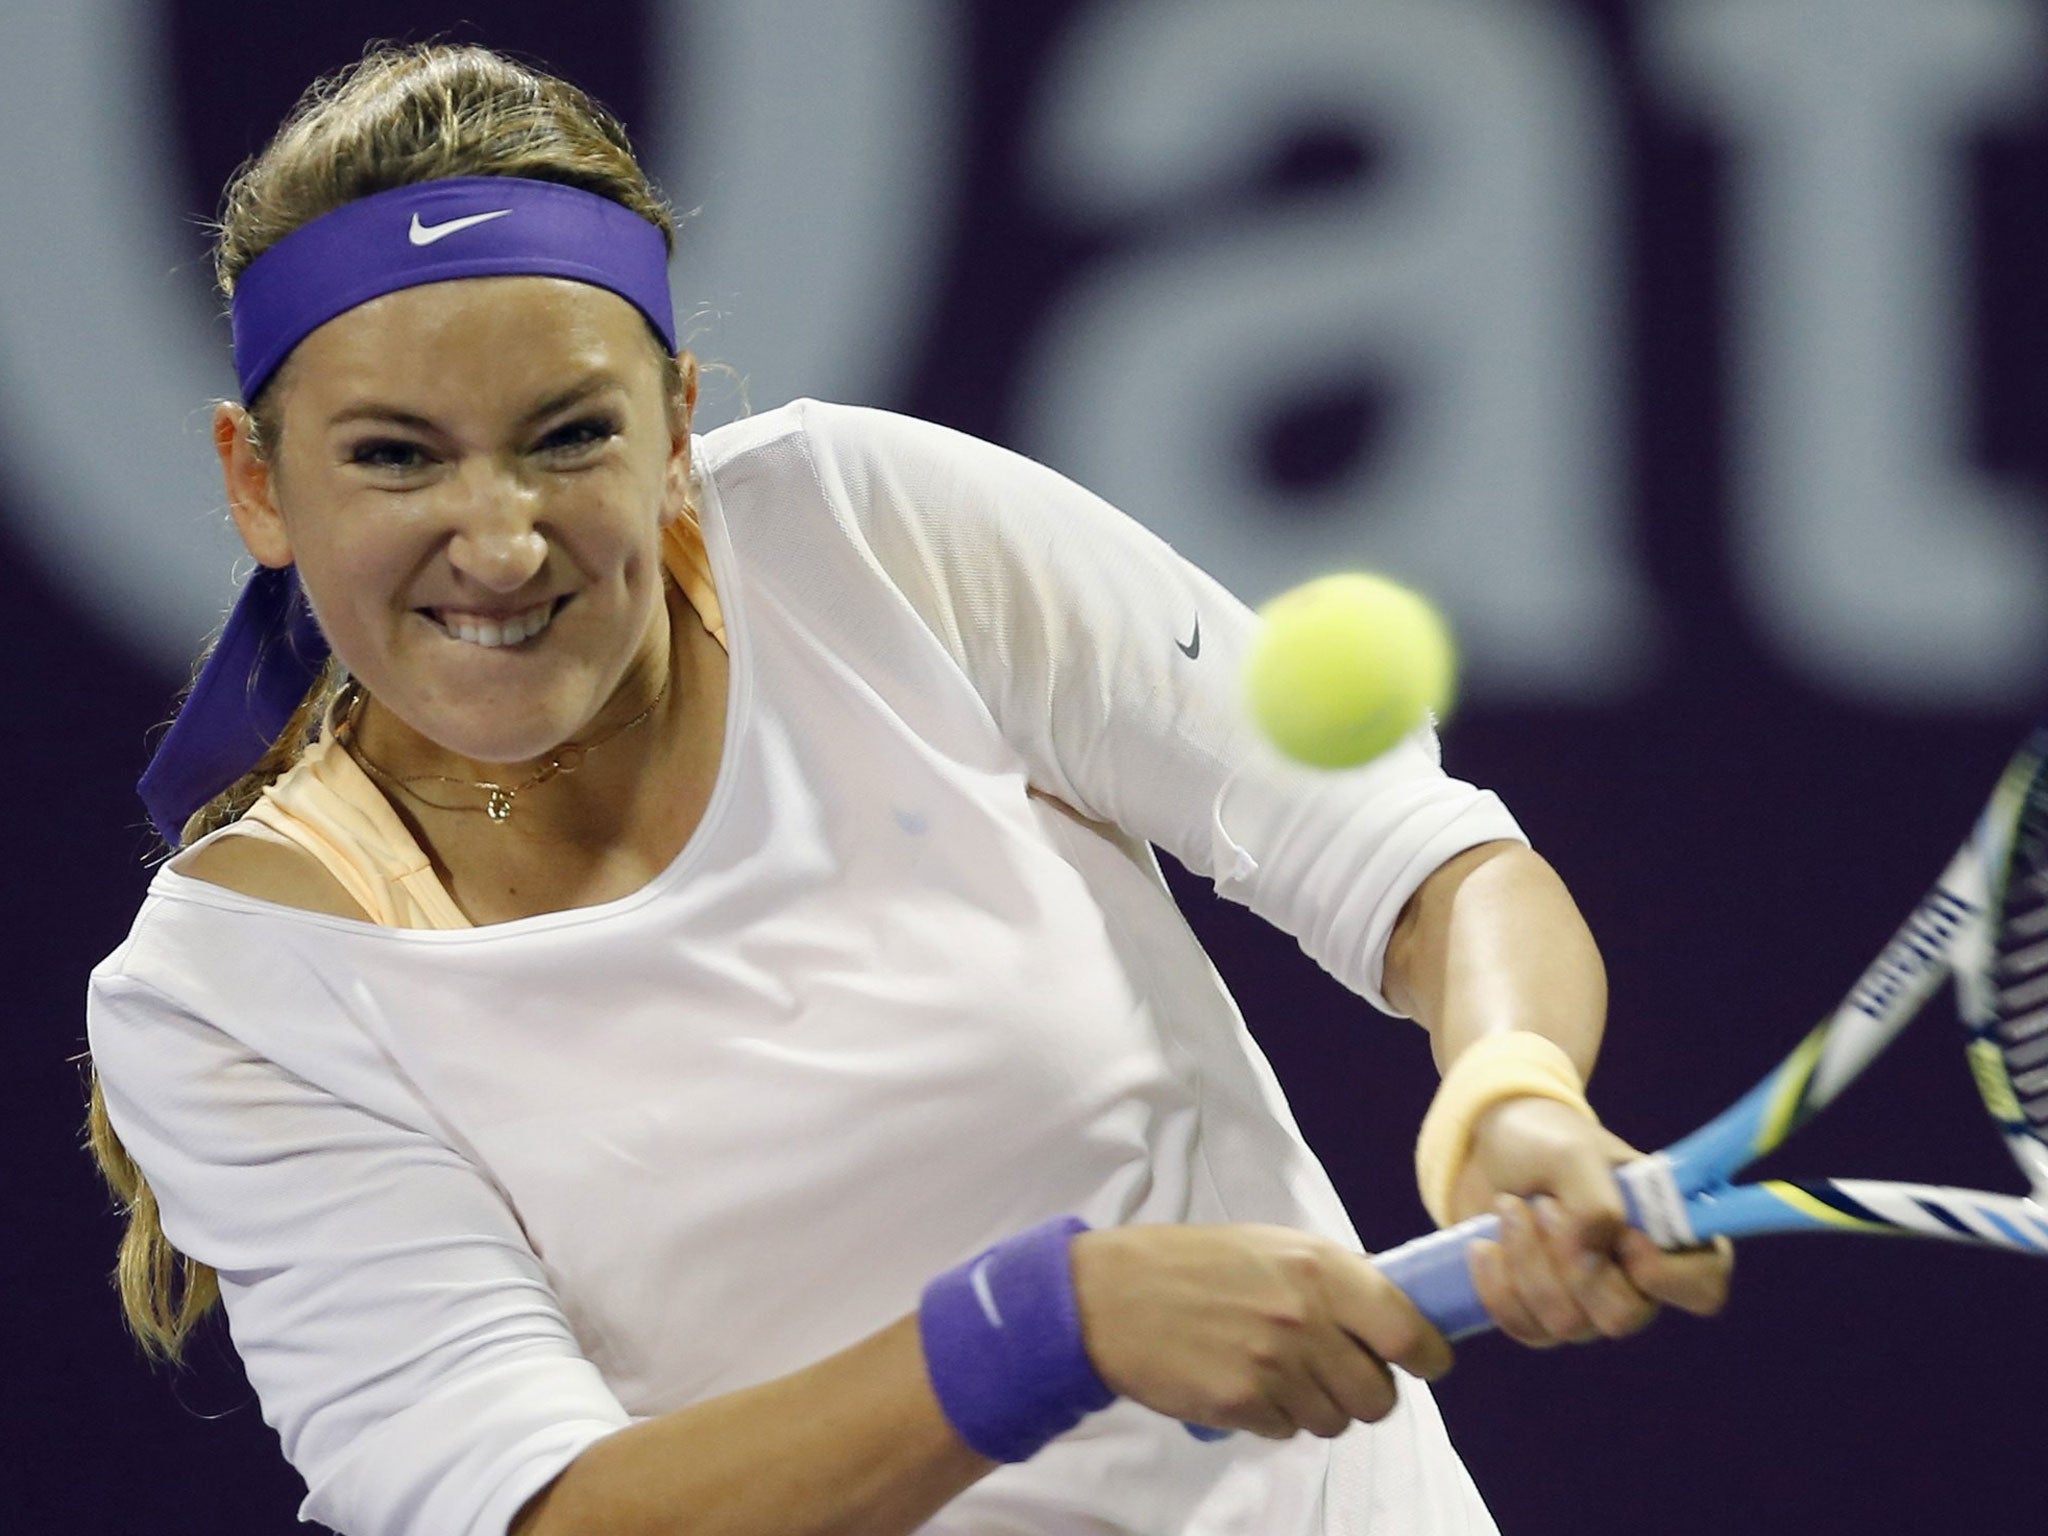 Victoria Azarenka: The former world No 1 was fined $100,000 for missing the Dubai event